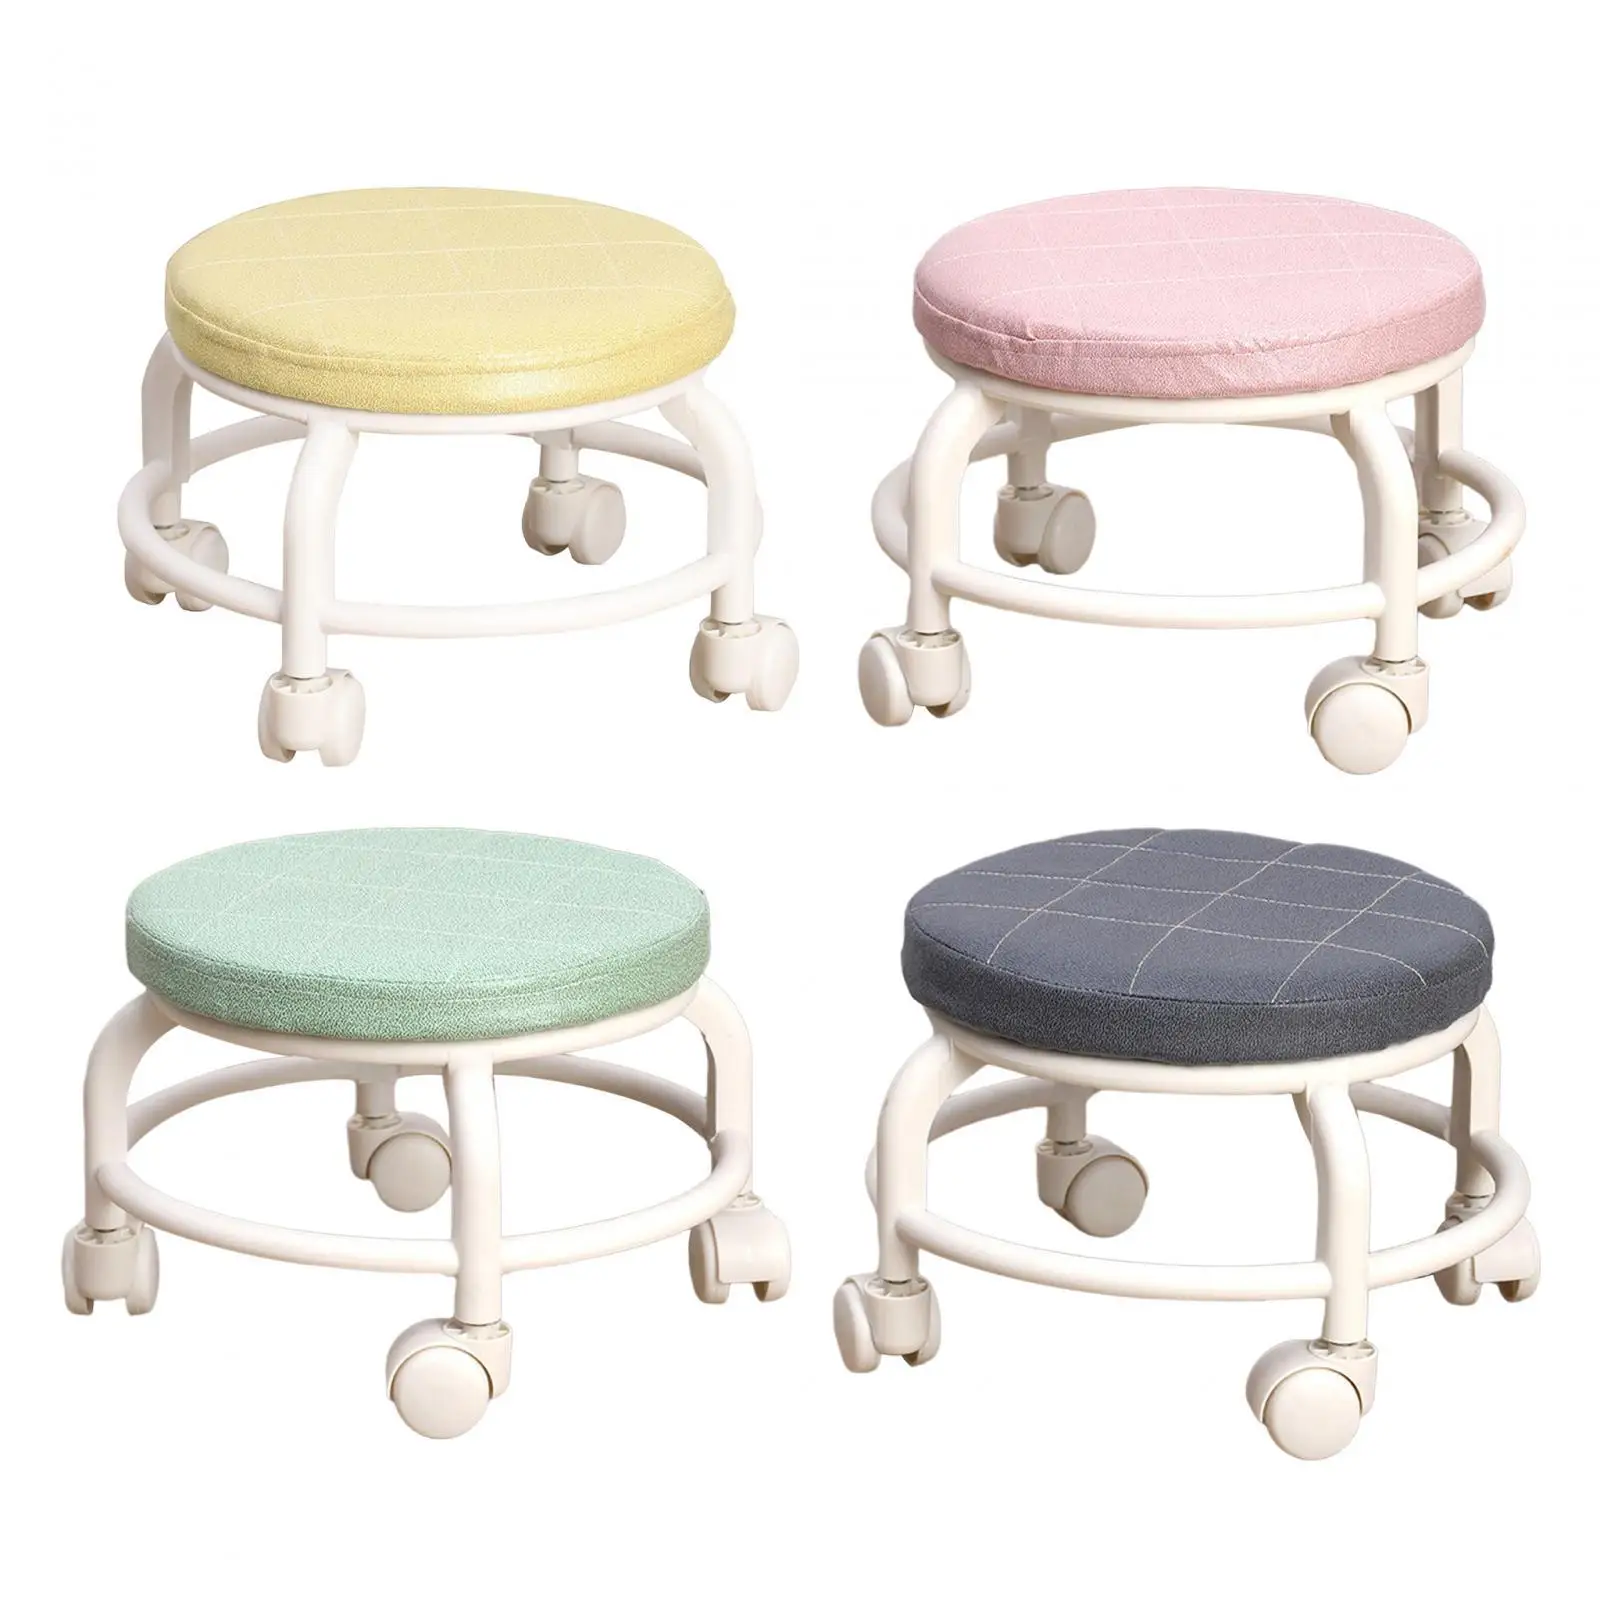 Round Roller Stool Heavy Duty Universal Swivel Casters Sturdy Swivel Chair Low Height Rolling Stool Pedicure Stool Barber Salons